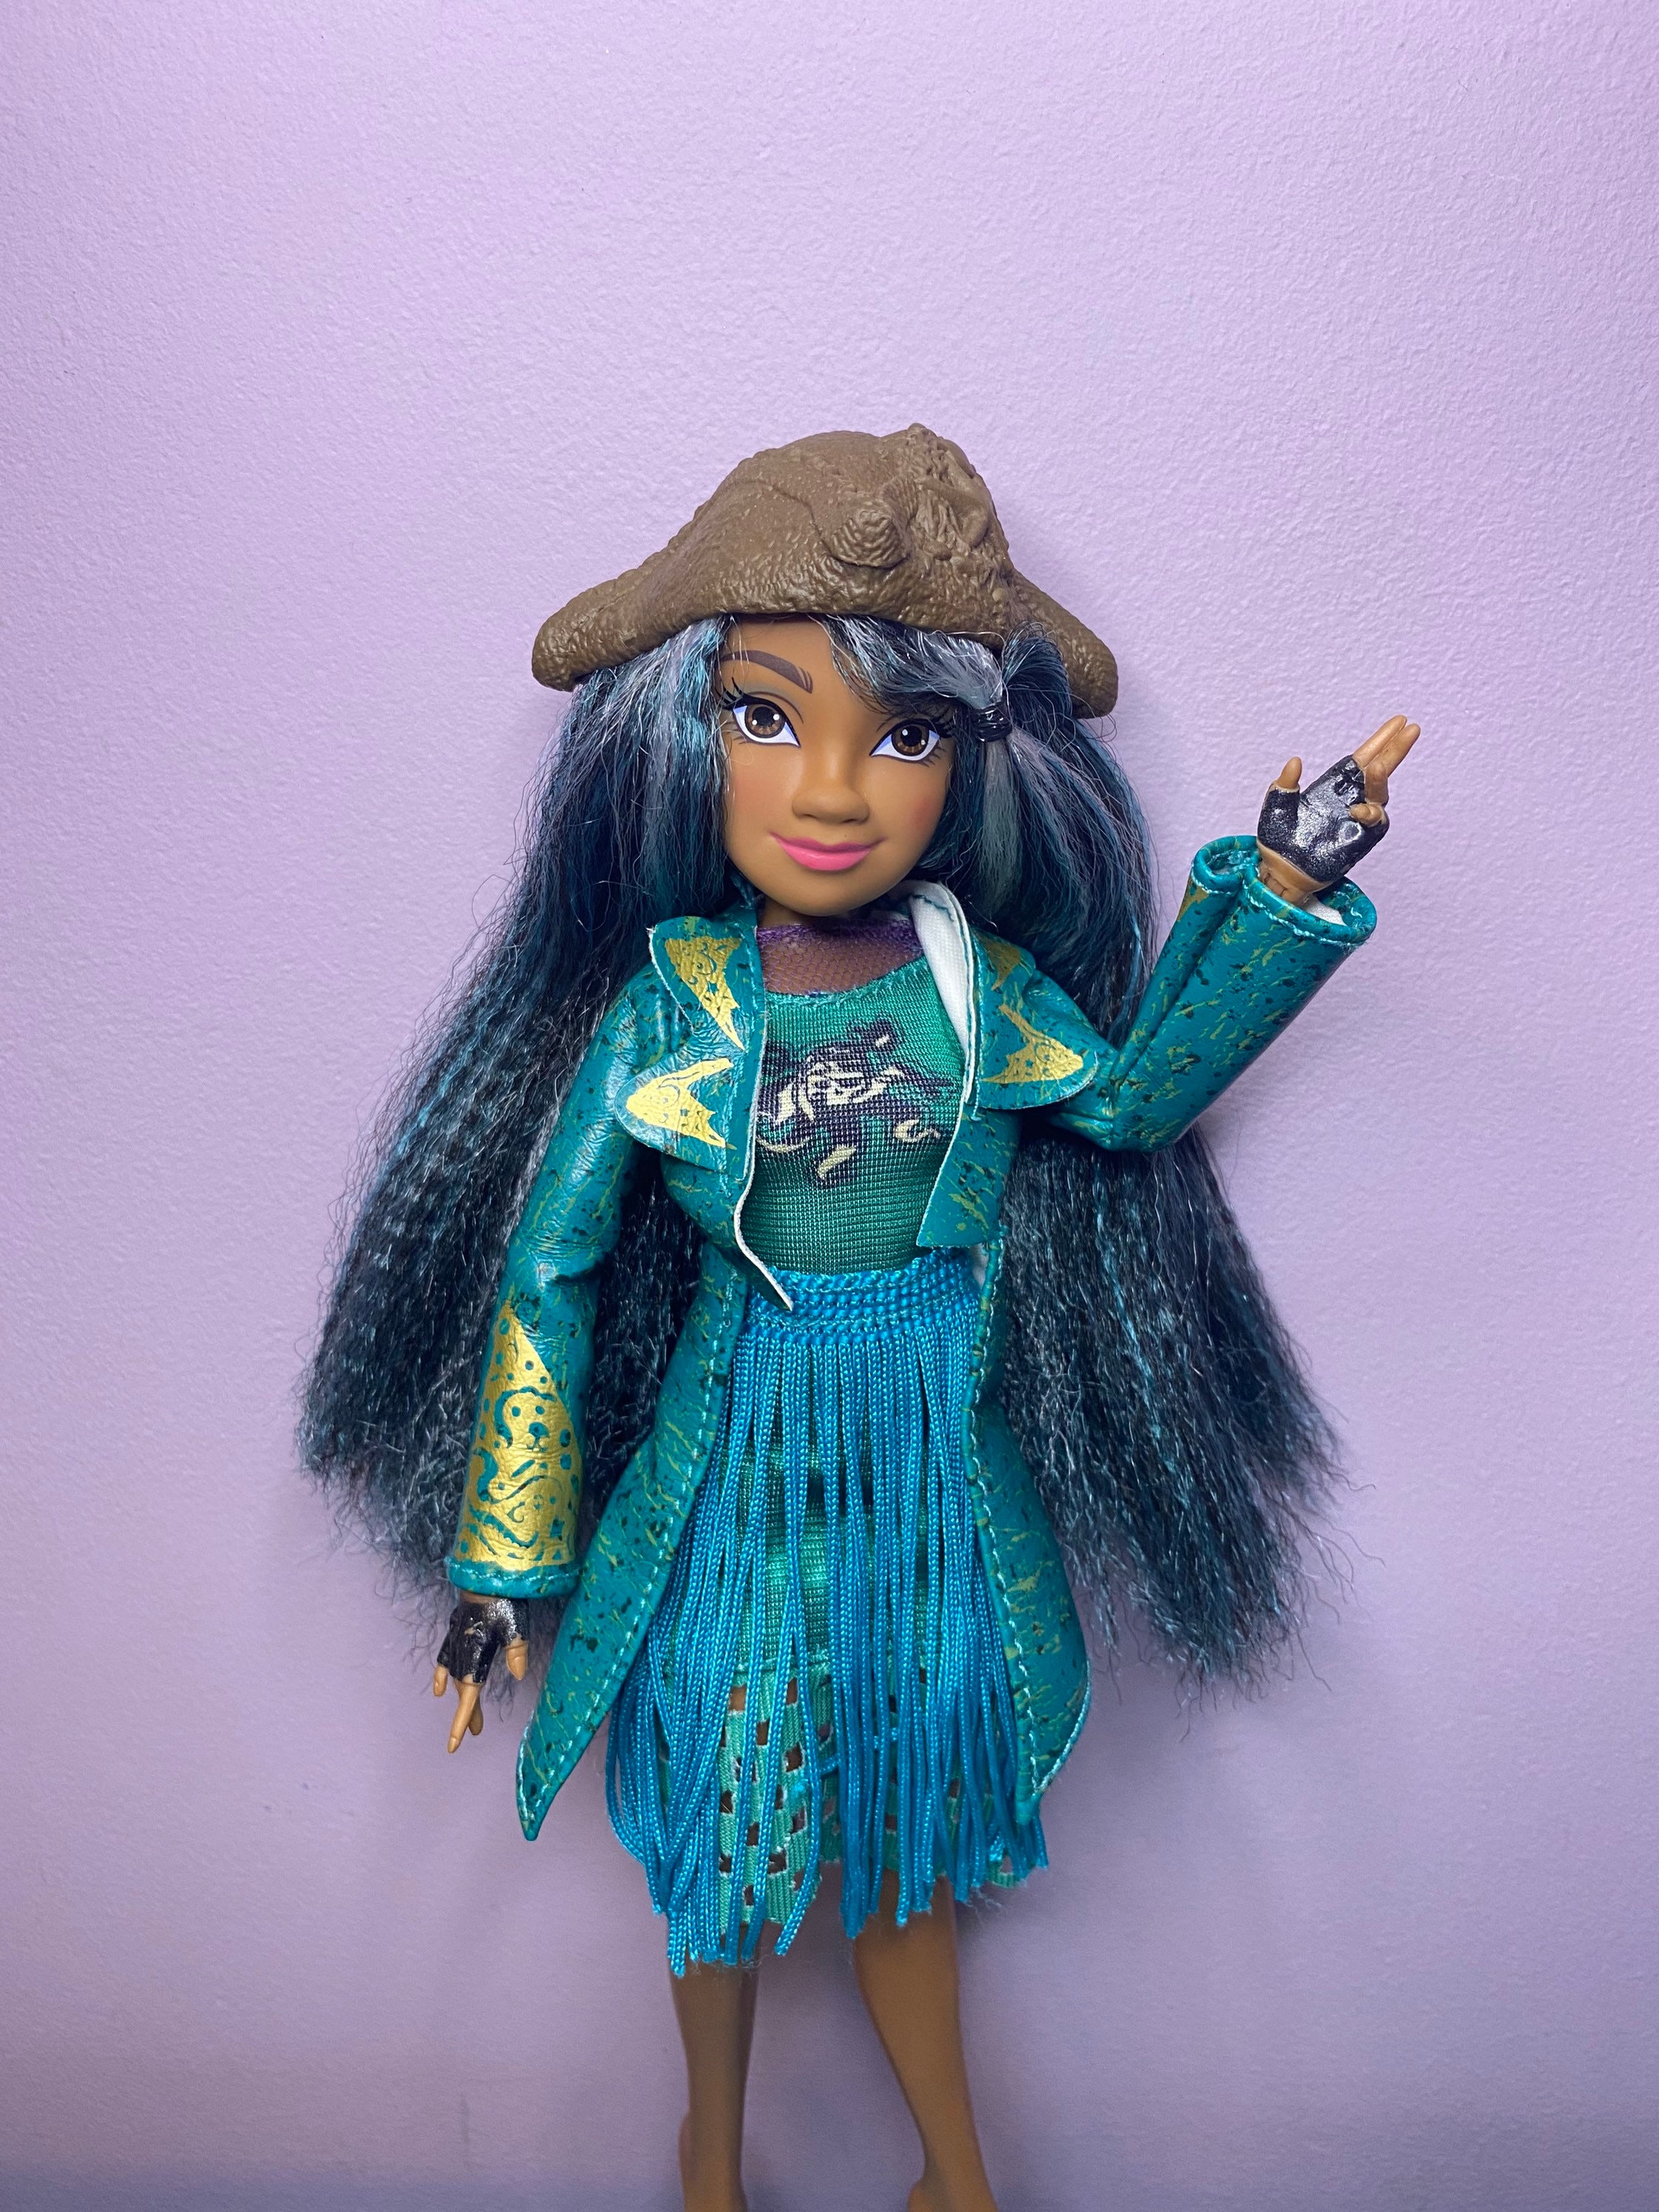  Disney Descendants 2 Uma Isle of the Lost Doll - Poseable,  Dressed to Impress, with Accessories : Hasbro: Toys & Games